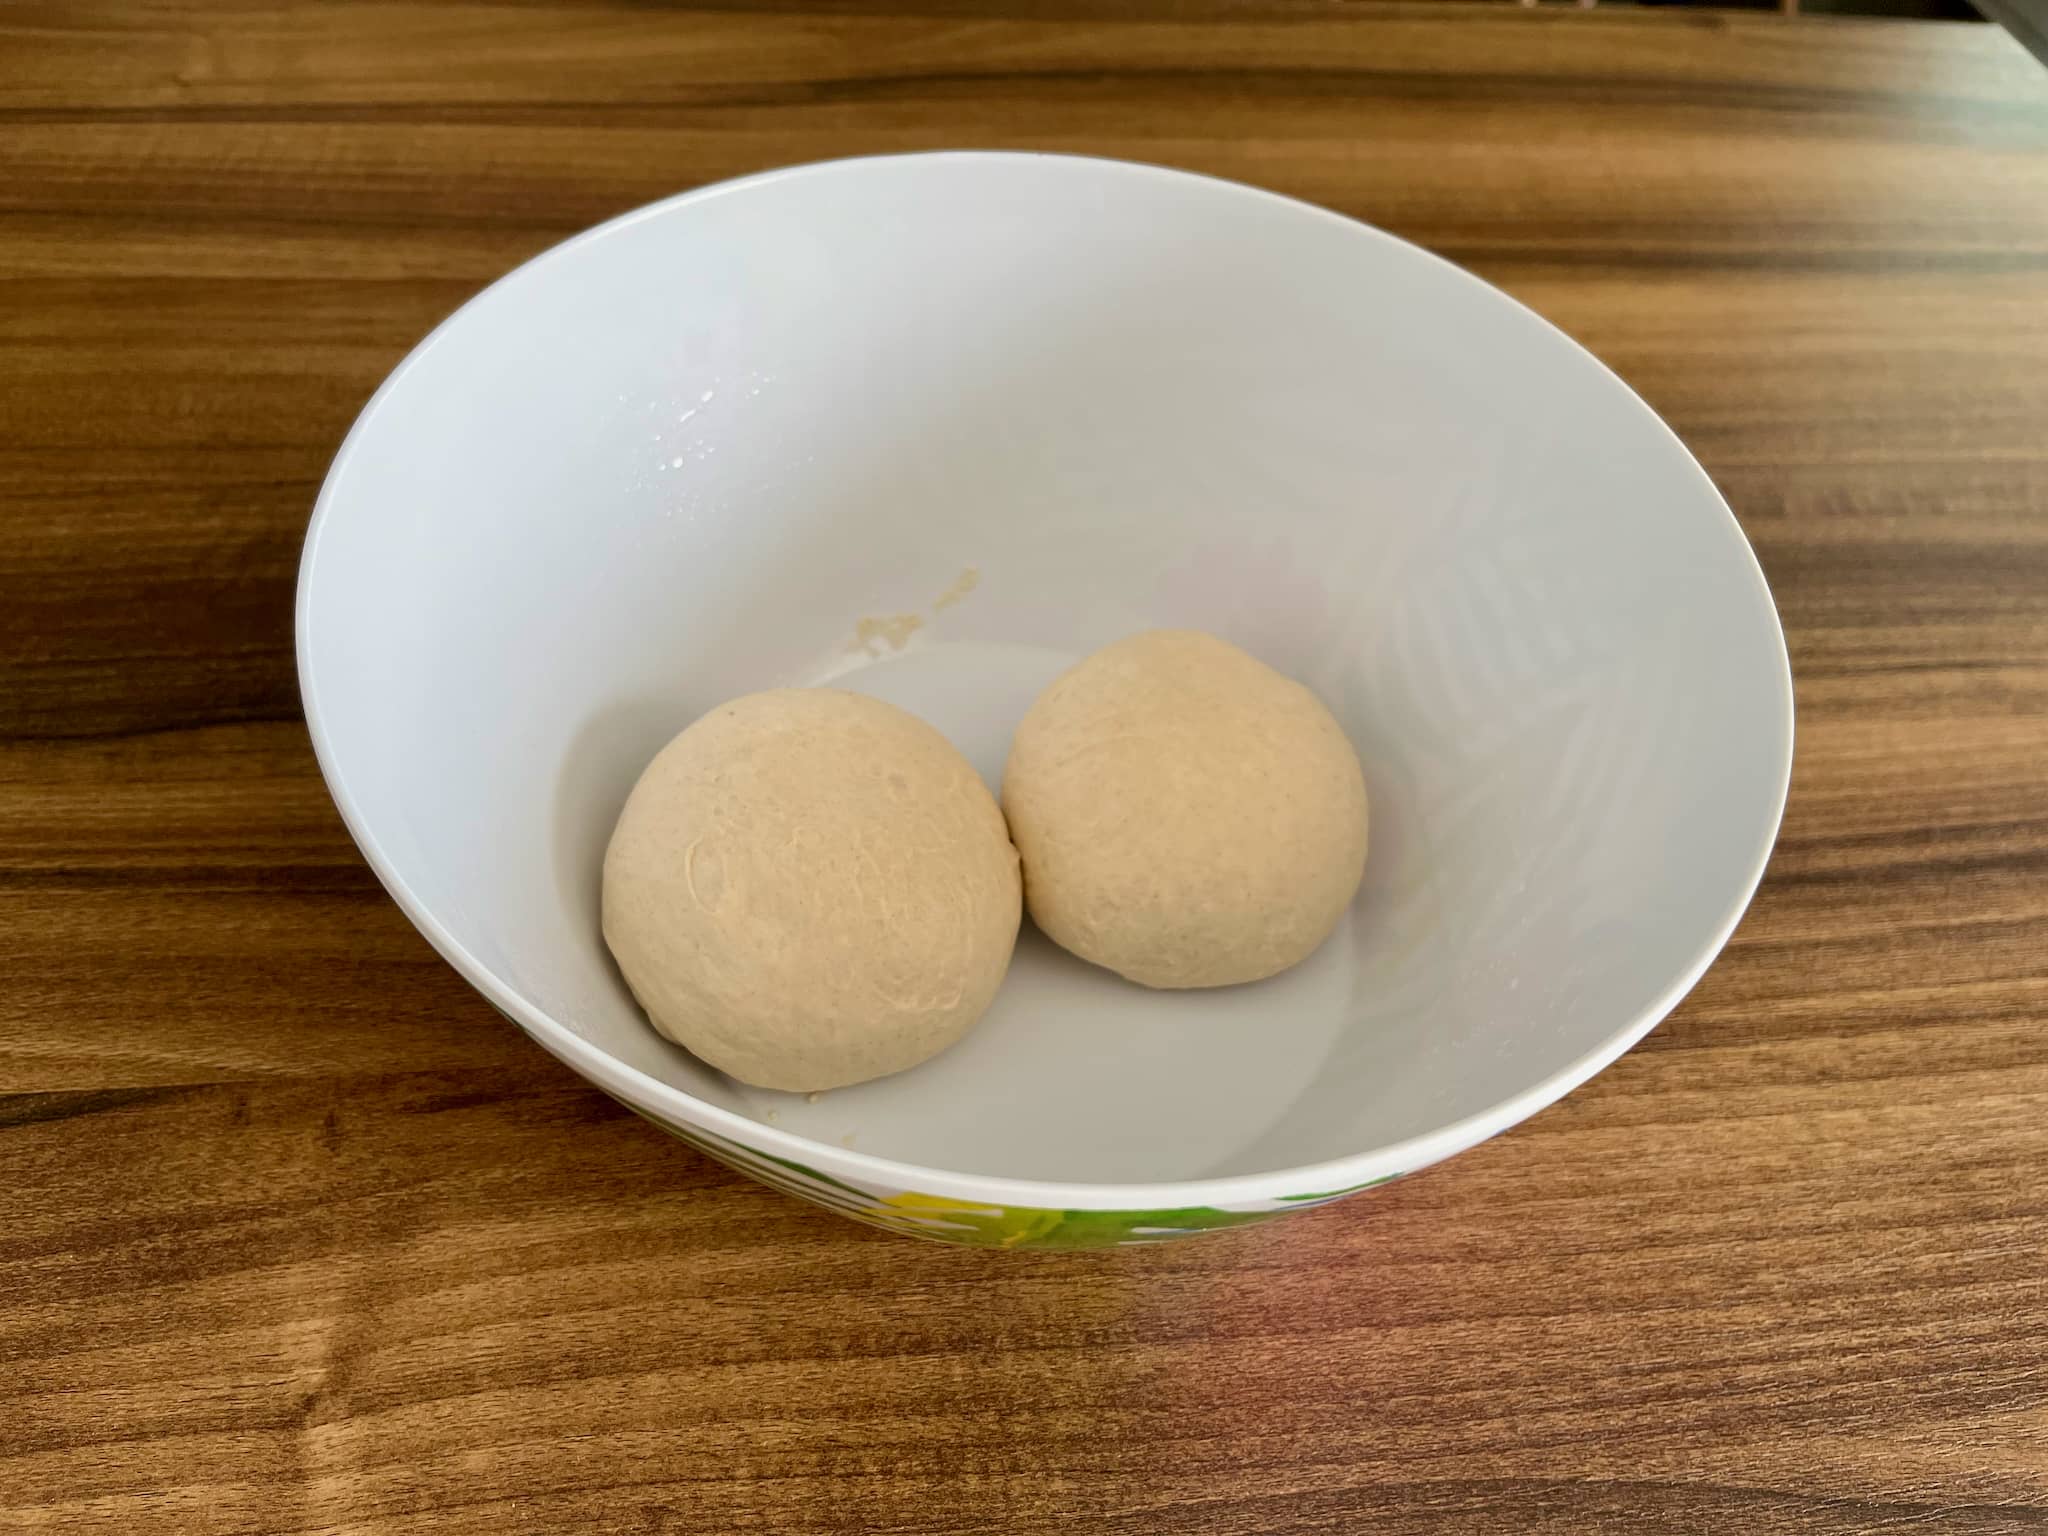 Divided dough into two balls